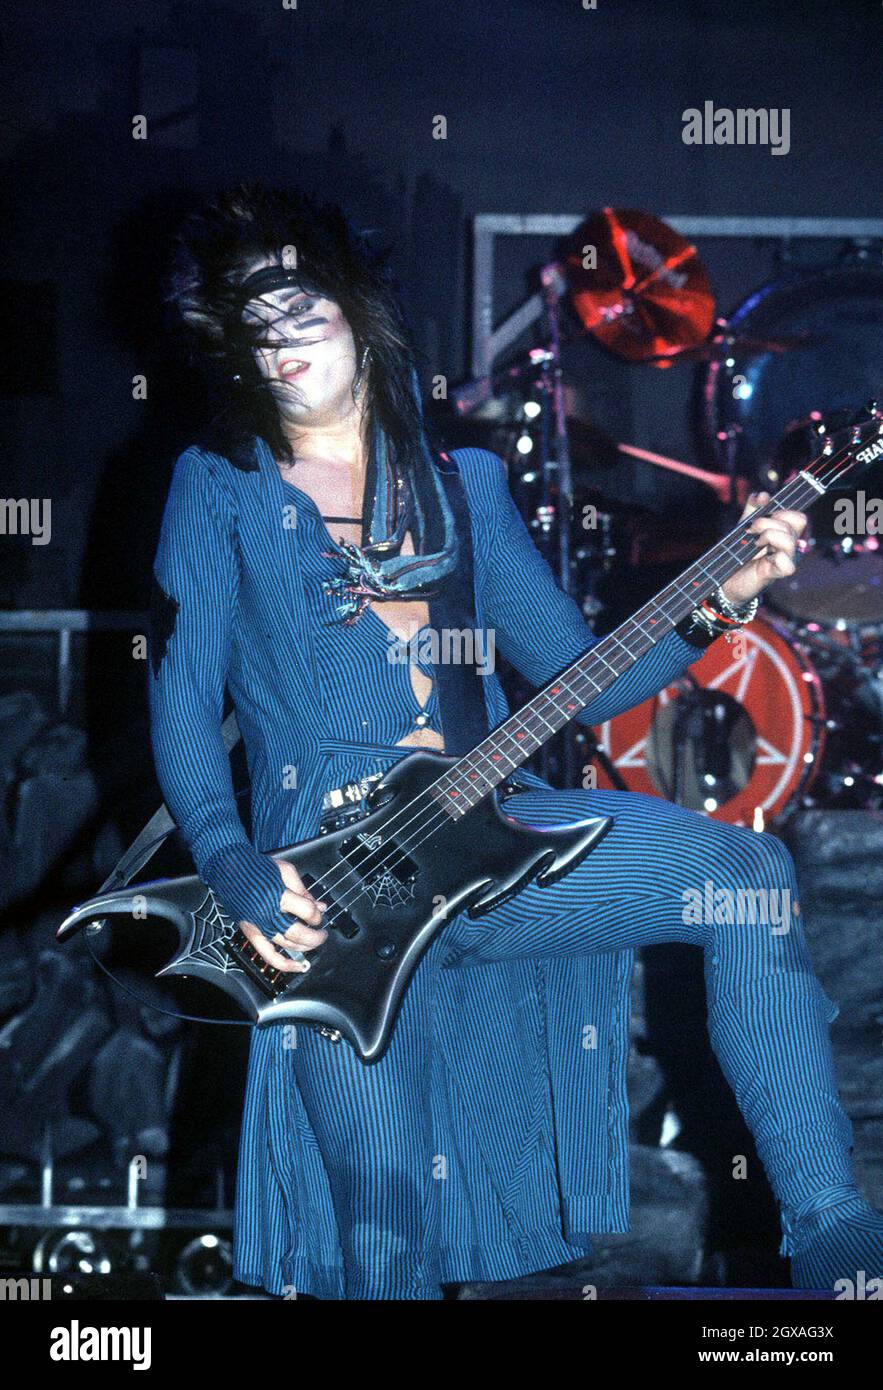 Nikki Sixx, bass player for the Motley Crue, performing live in